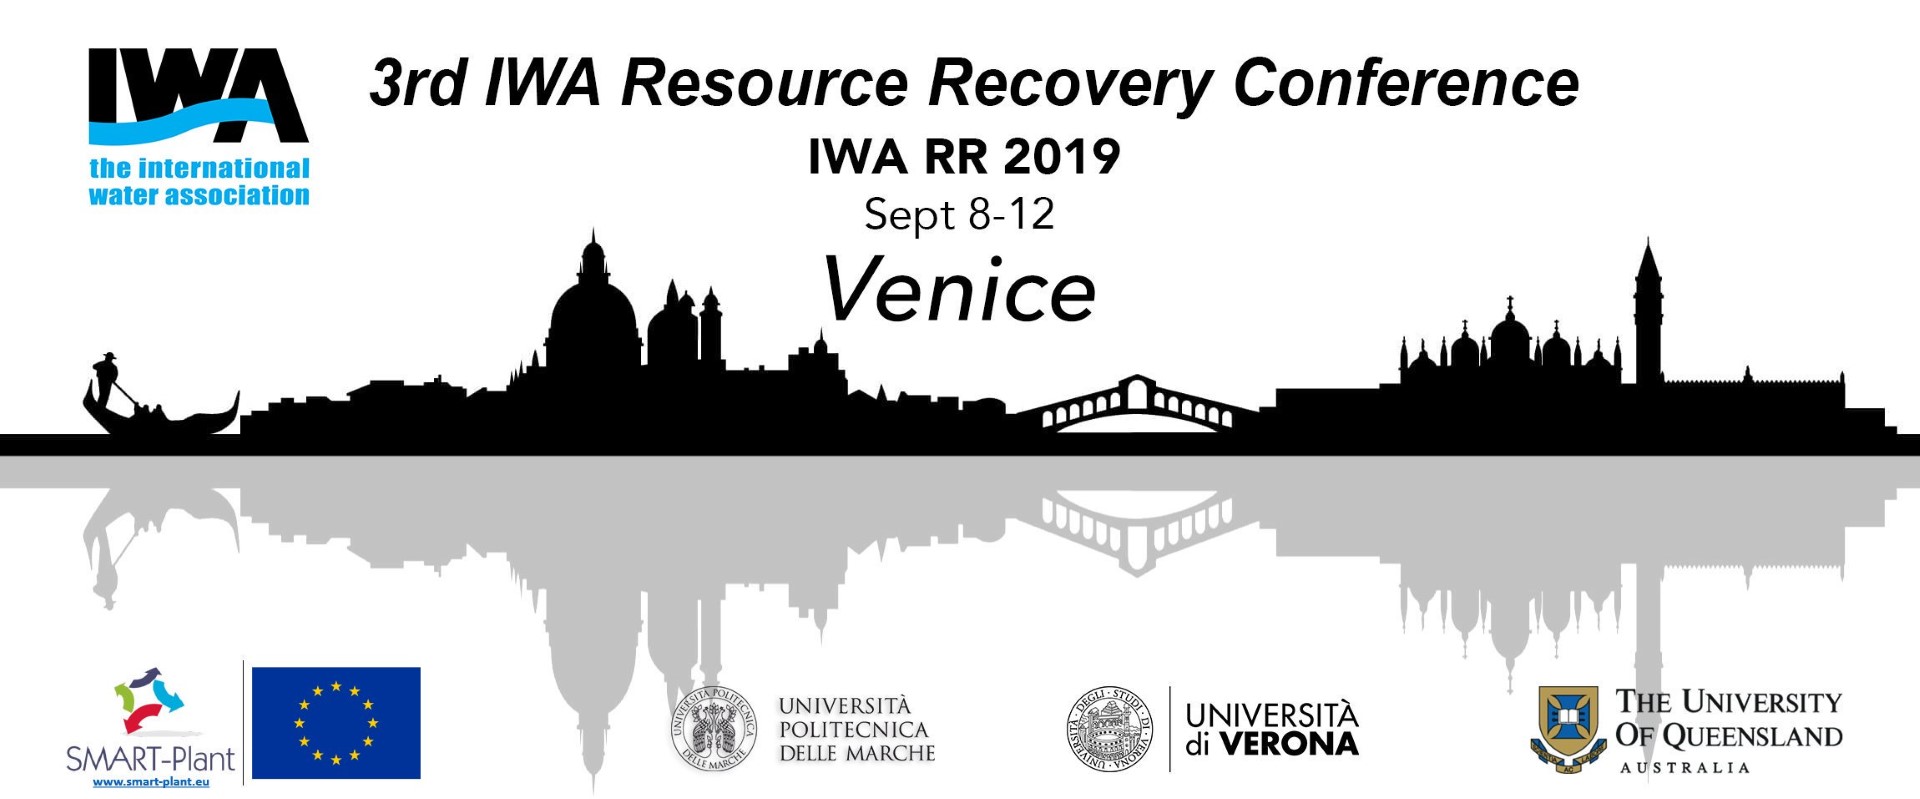 3rd IWA Conference on Resource Recovery in Venice, September 2019